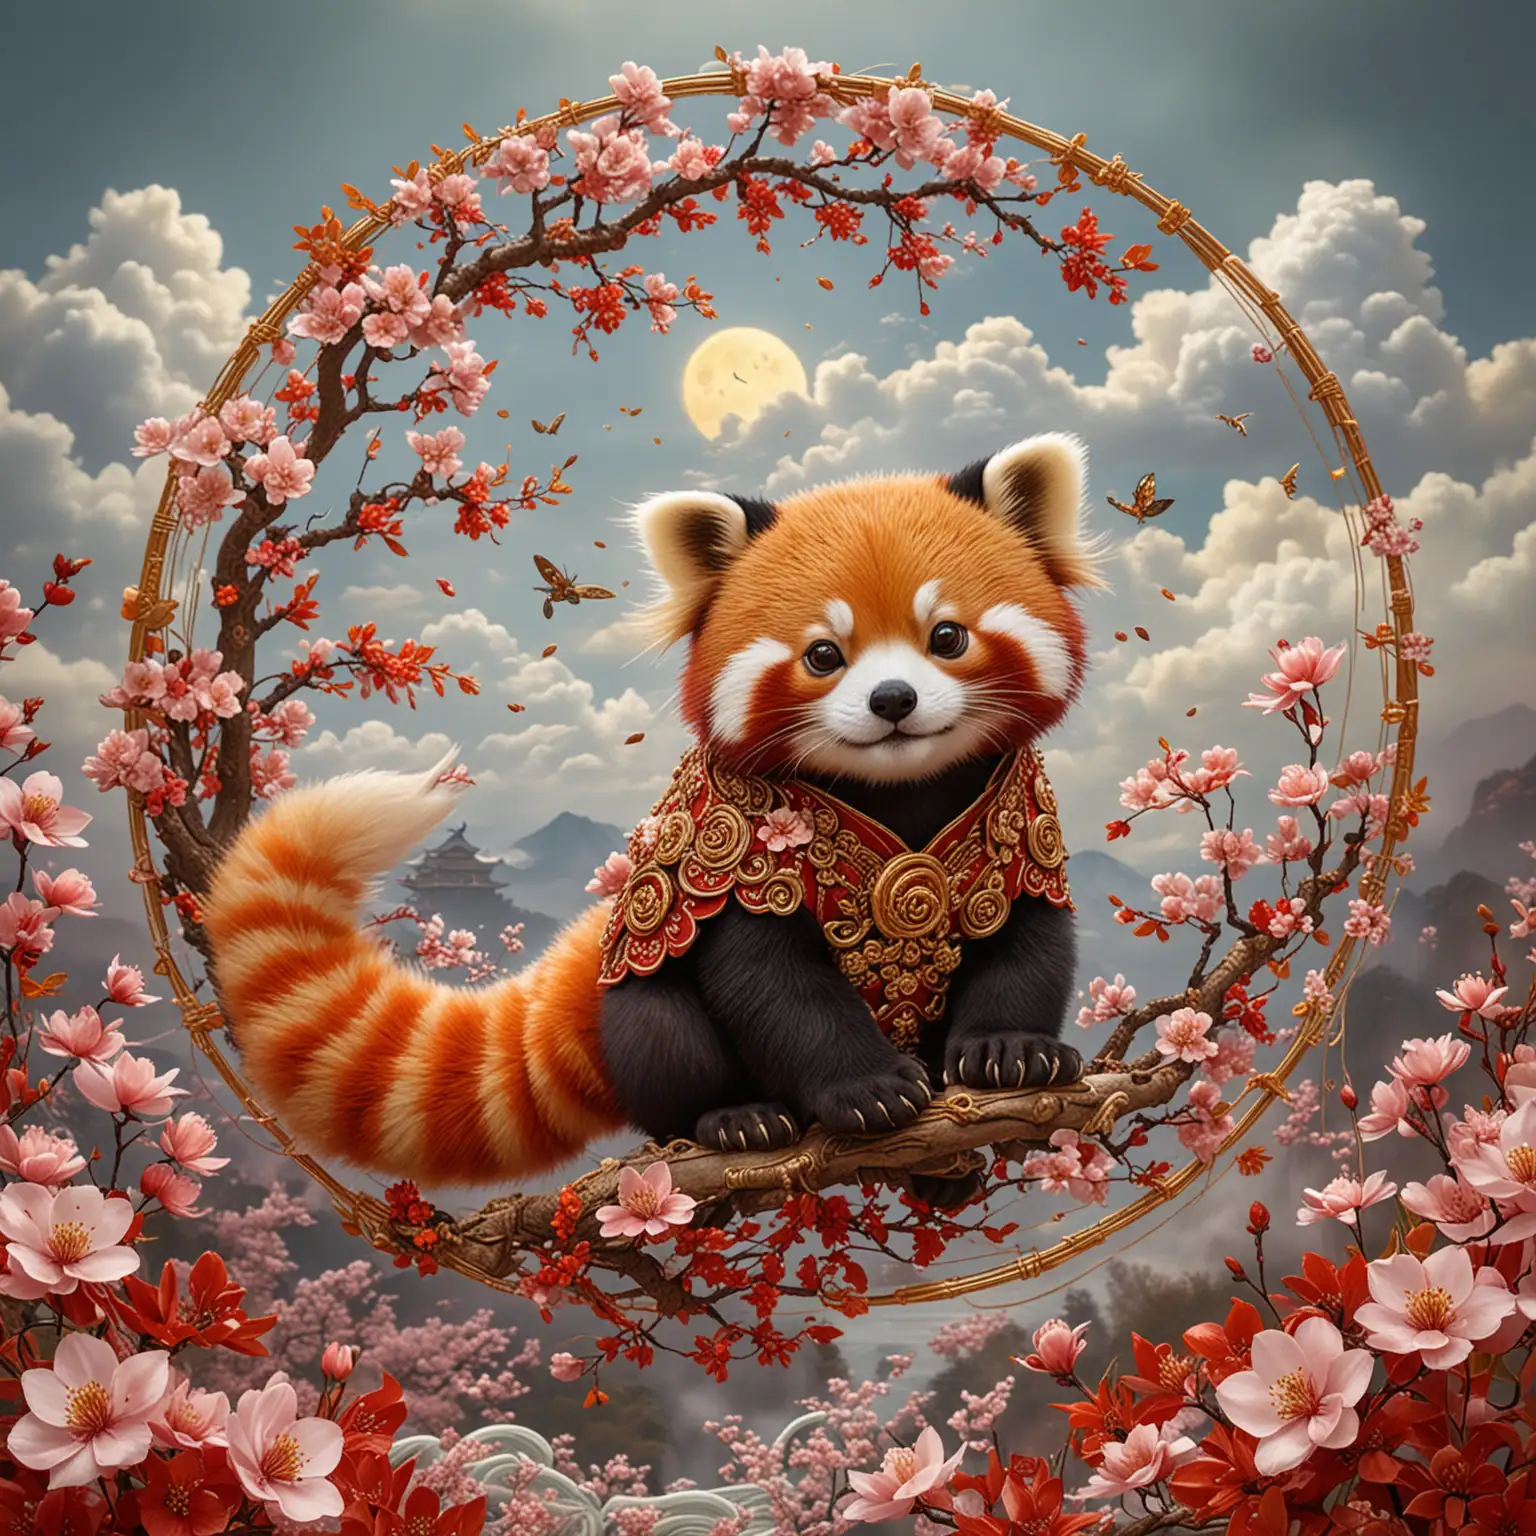 A red panda with 9 tails  wears intricate golden wire lace all down her body, this oriental ornamentation serves to honor the gods of rejuvenation and spring,  a spirl of floating cherry blossoms form behind her on the wind. Far in the distance a cloud dragon smiles